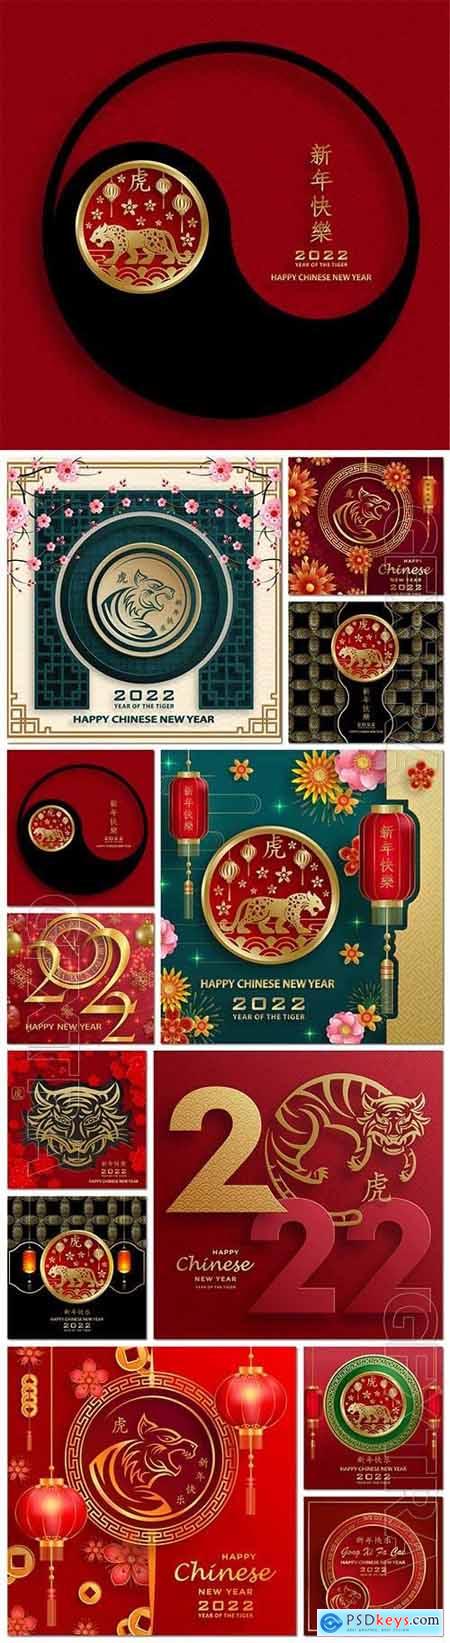 2022 happy chinese new year, tiger zodiac sign